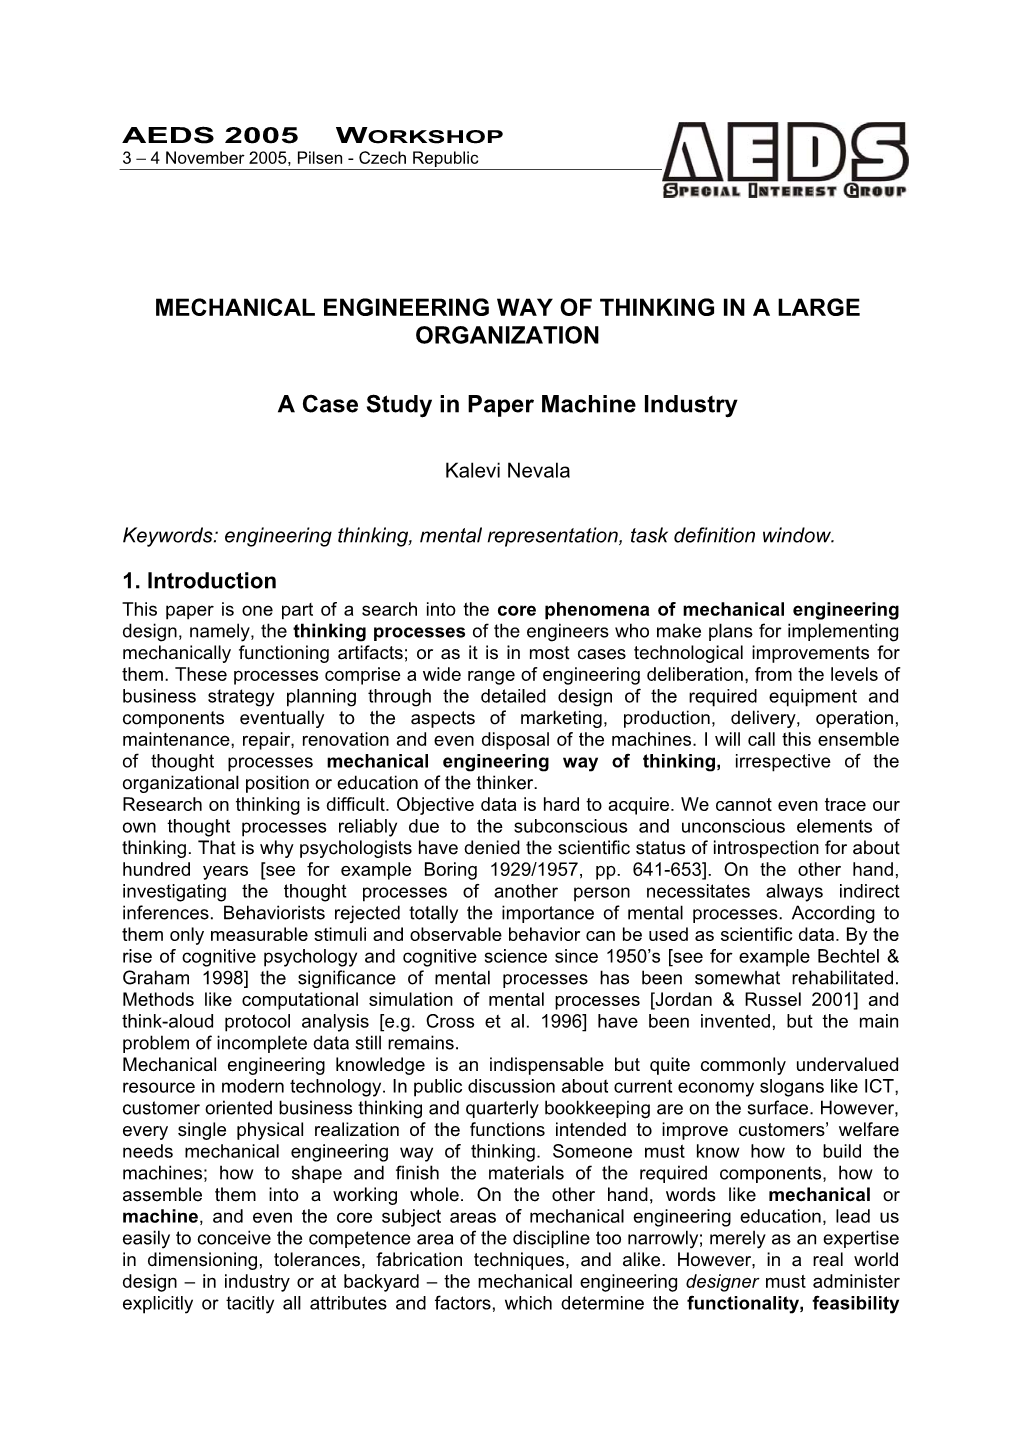 Mechanical Engineering Way of Thinking in a Large Organization